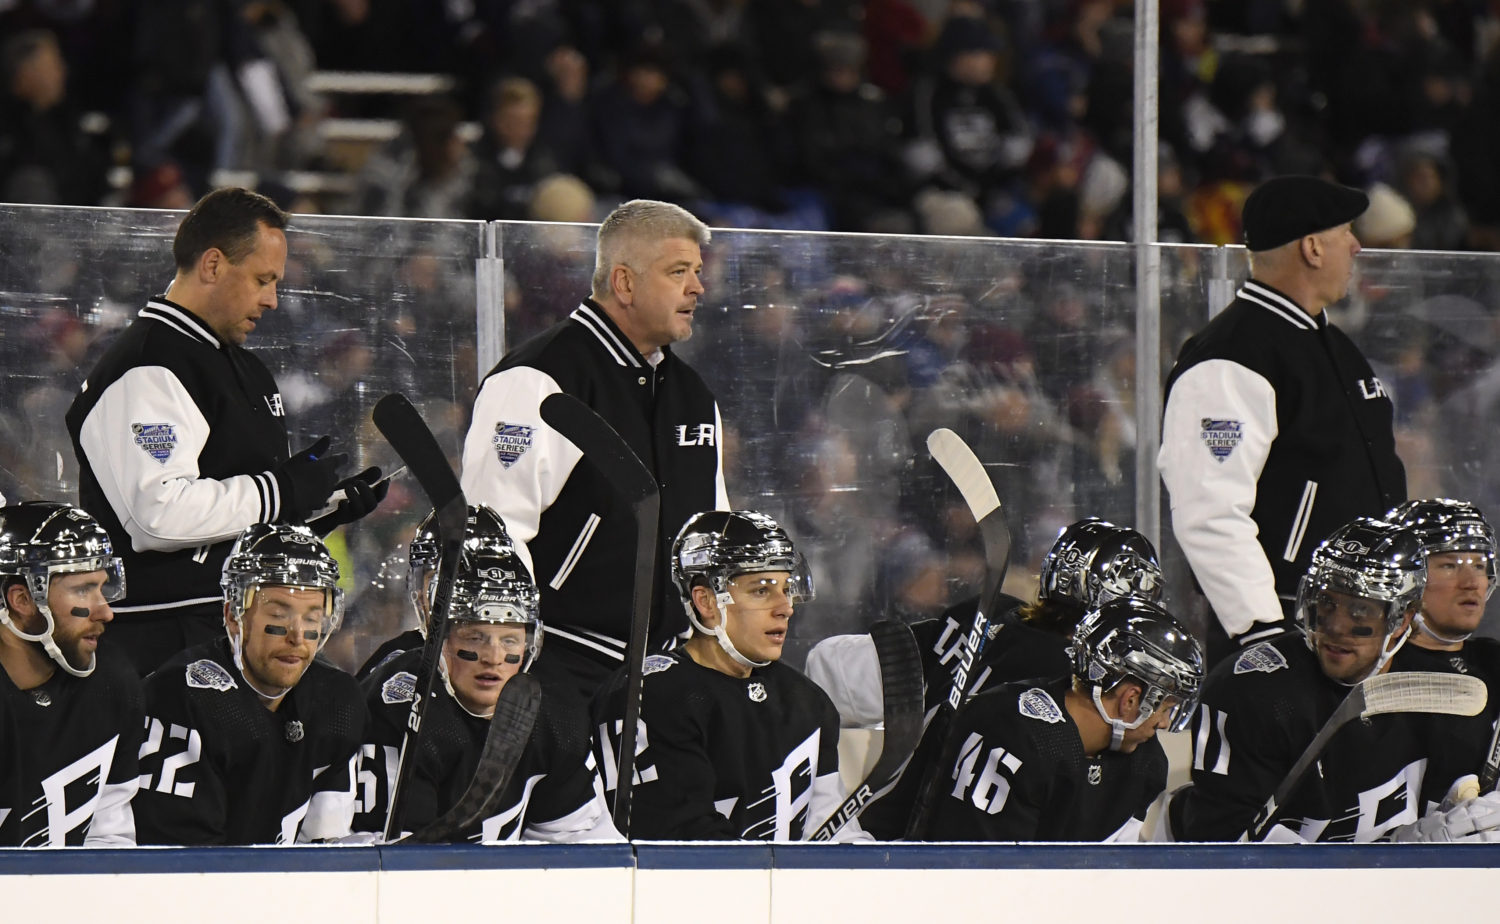 Merchandise is displayed during the LA Kings/NHL Stadium Series News  Photo - Getty Images